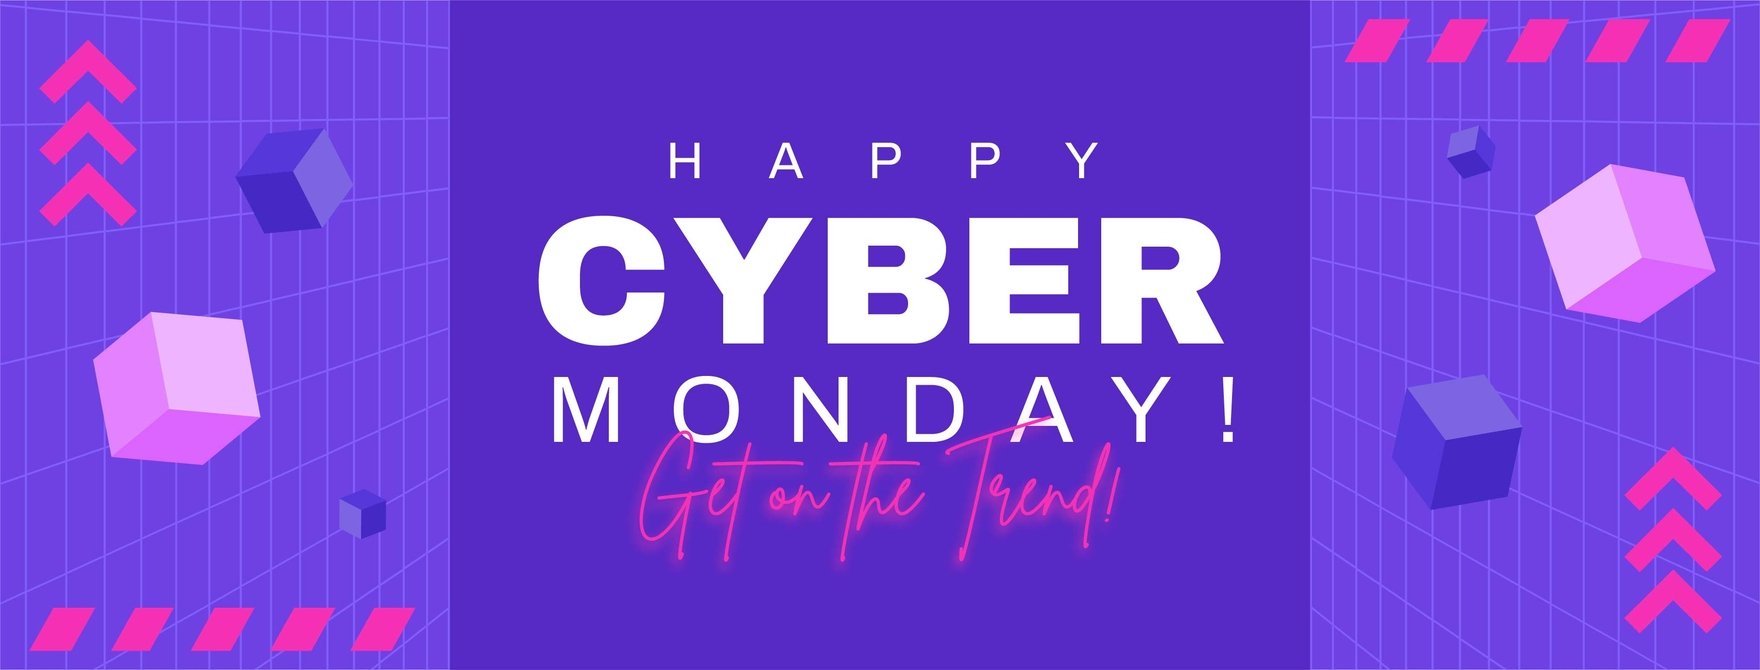 Cyber Monday Facebook Cover Banner